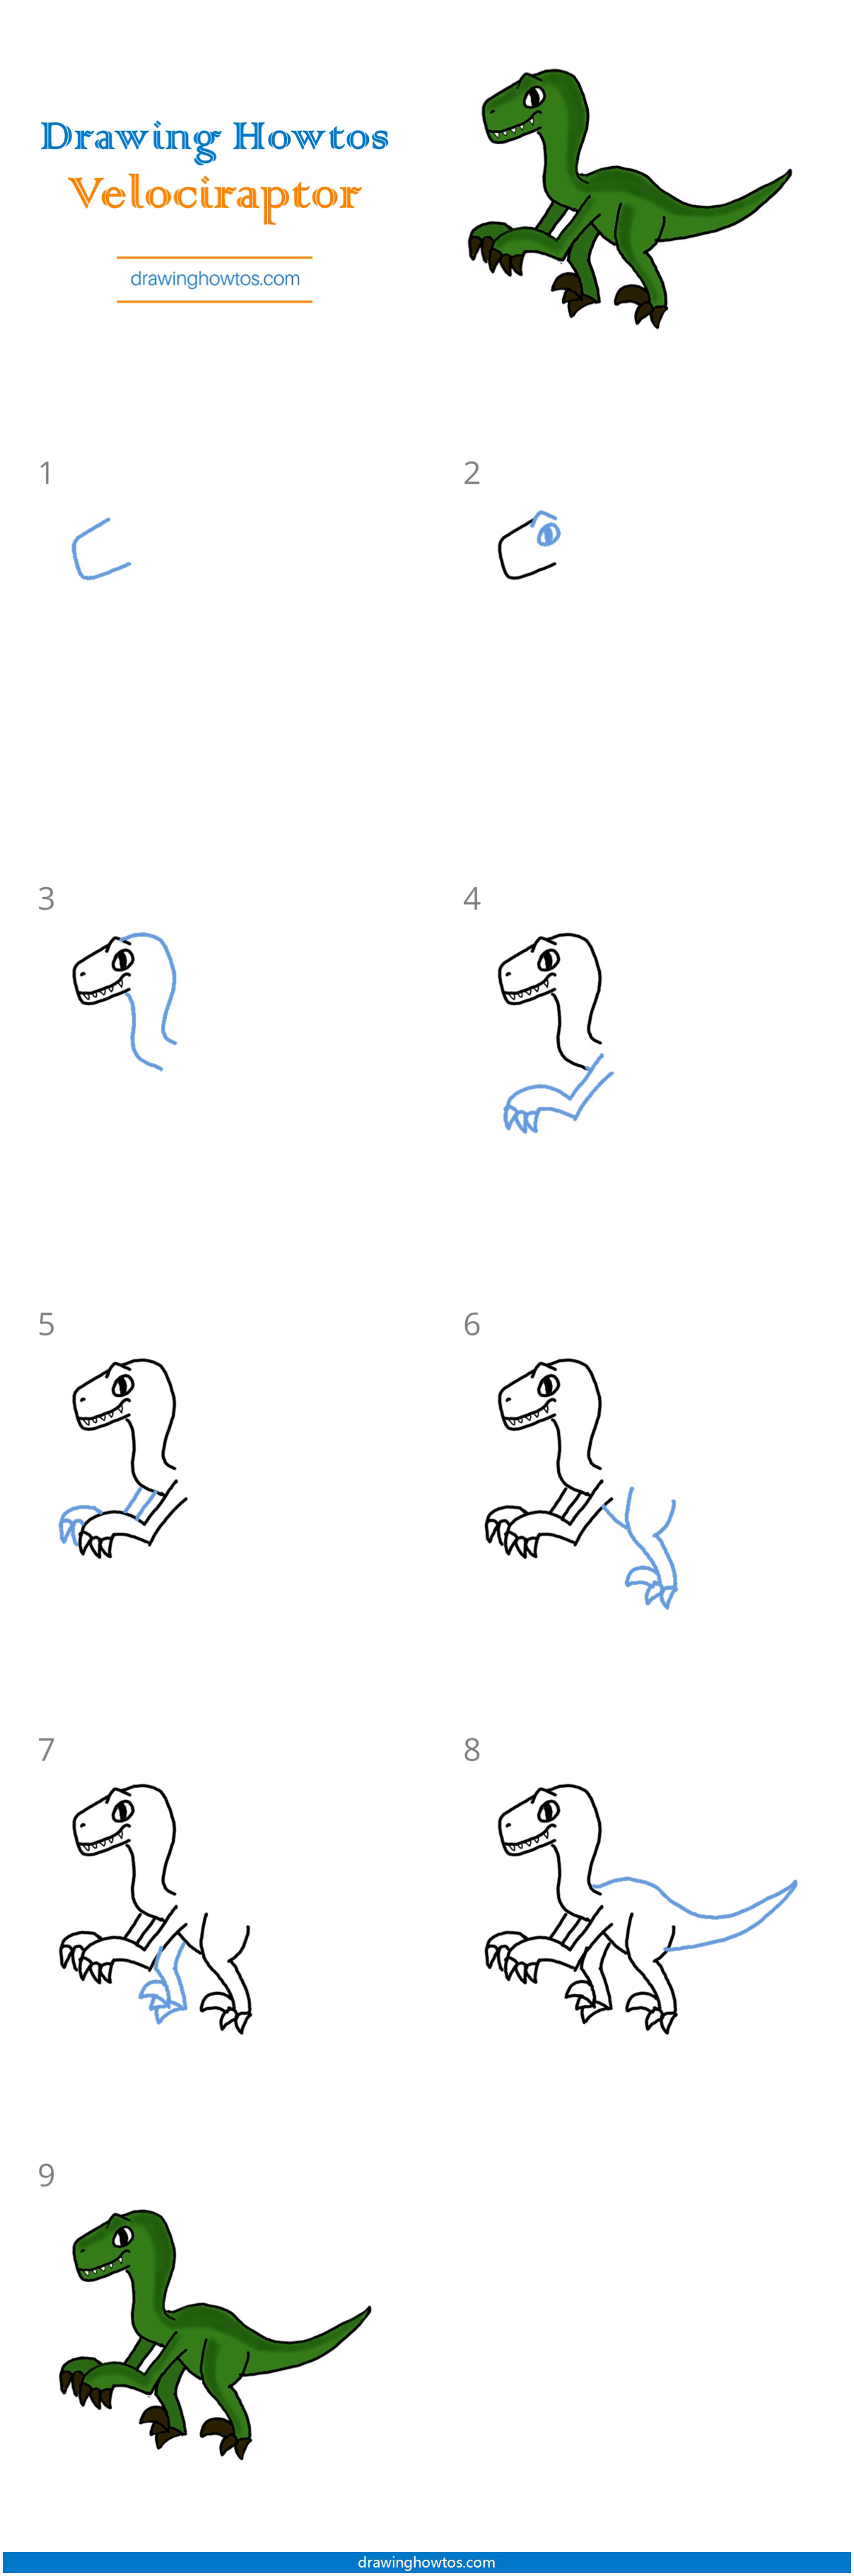 How to Draw a Velociraptor Step by Step